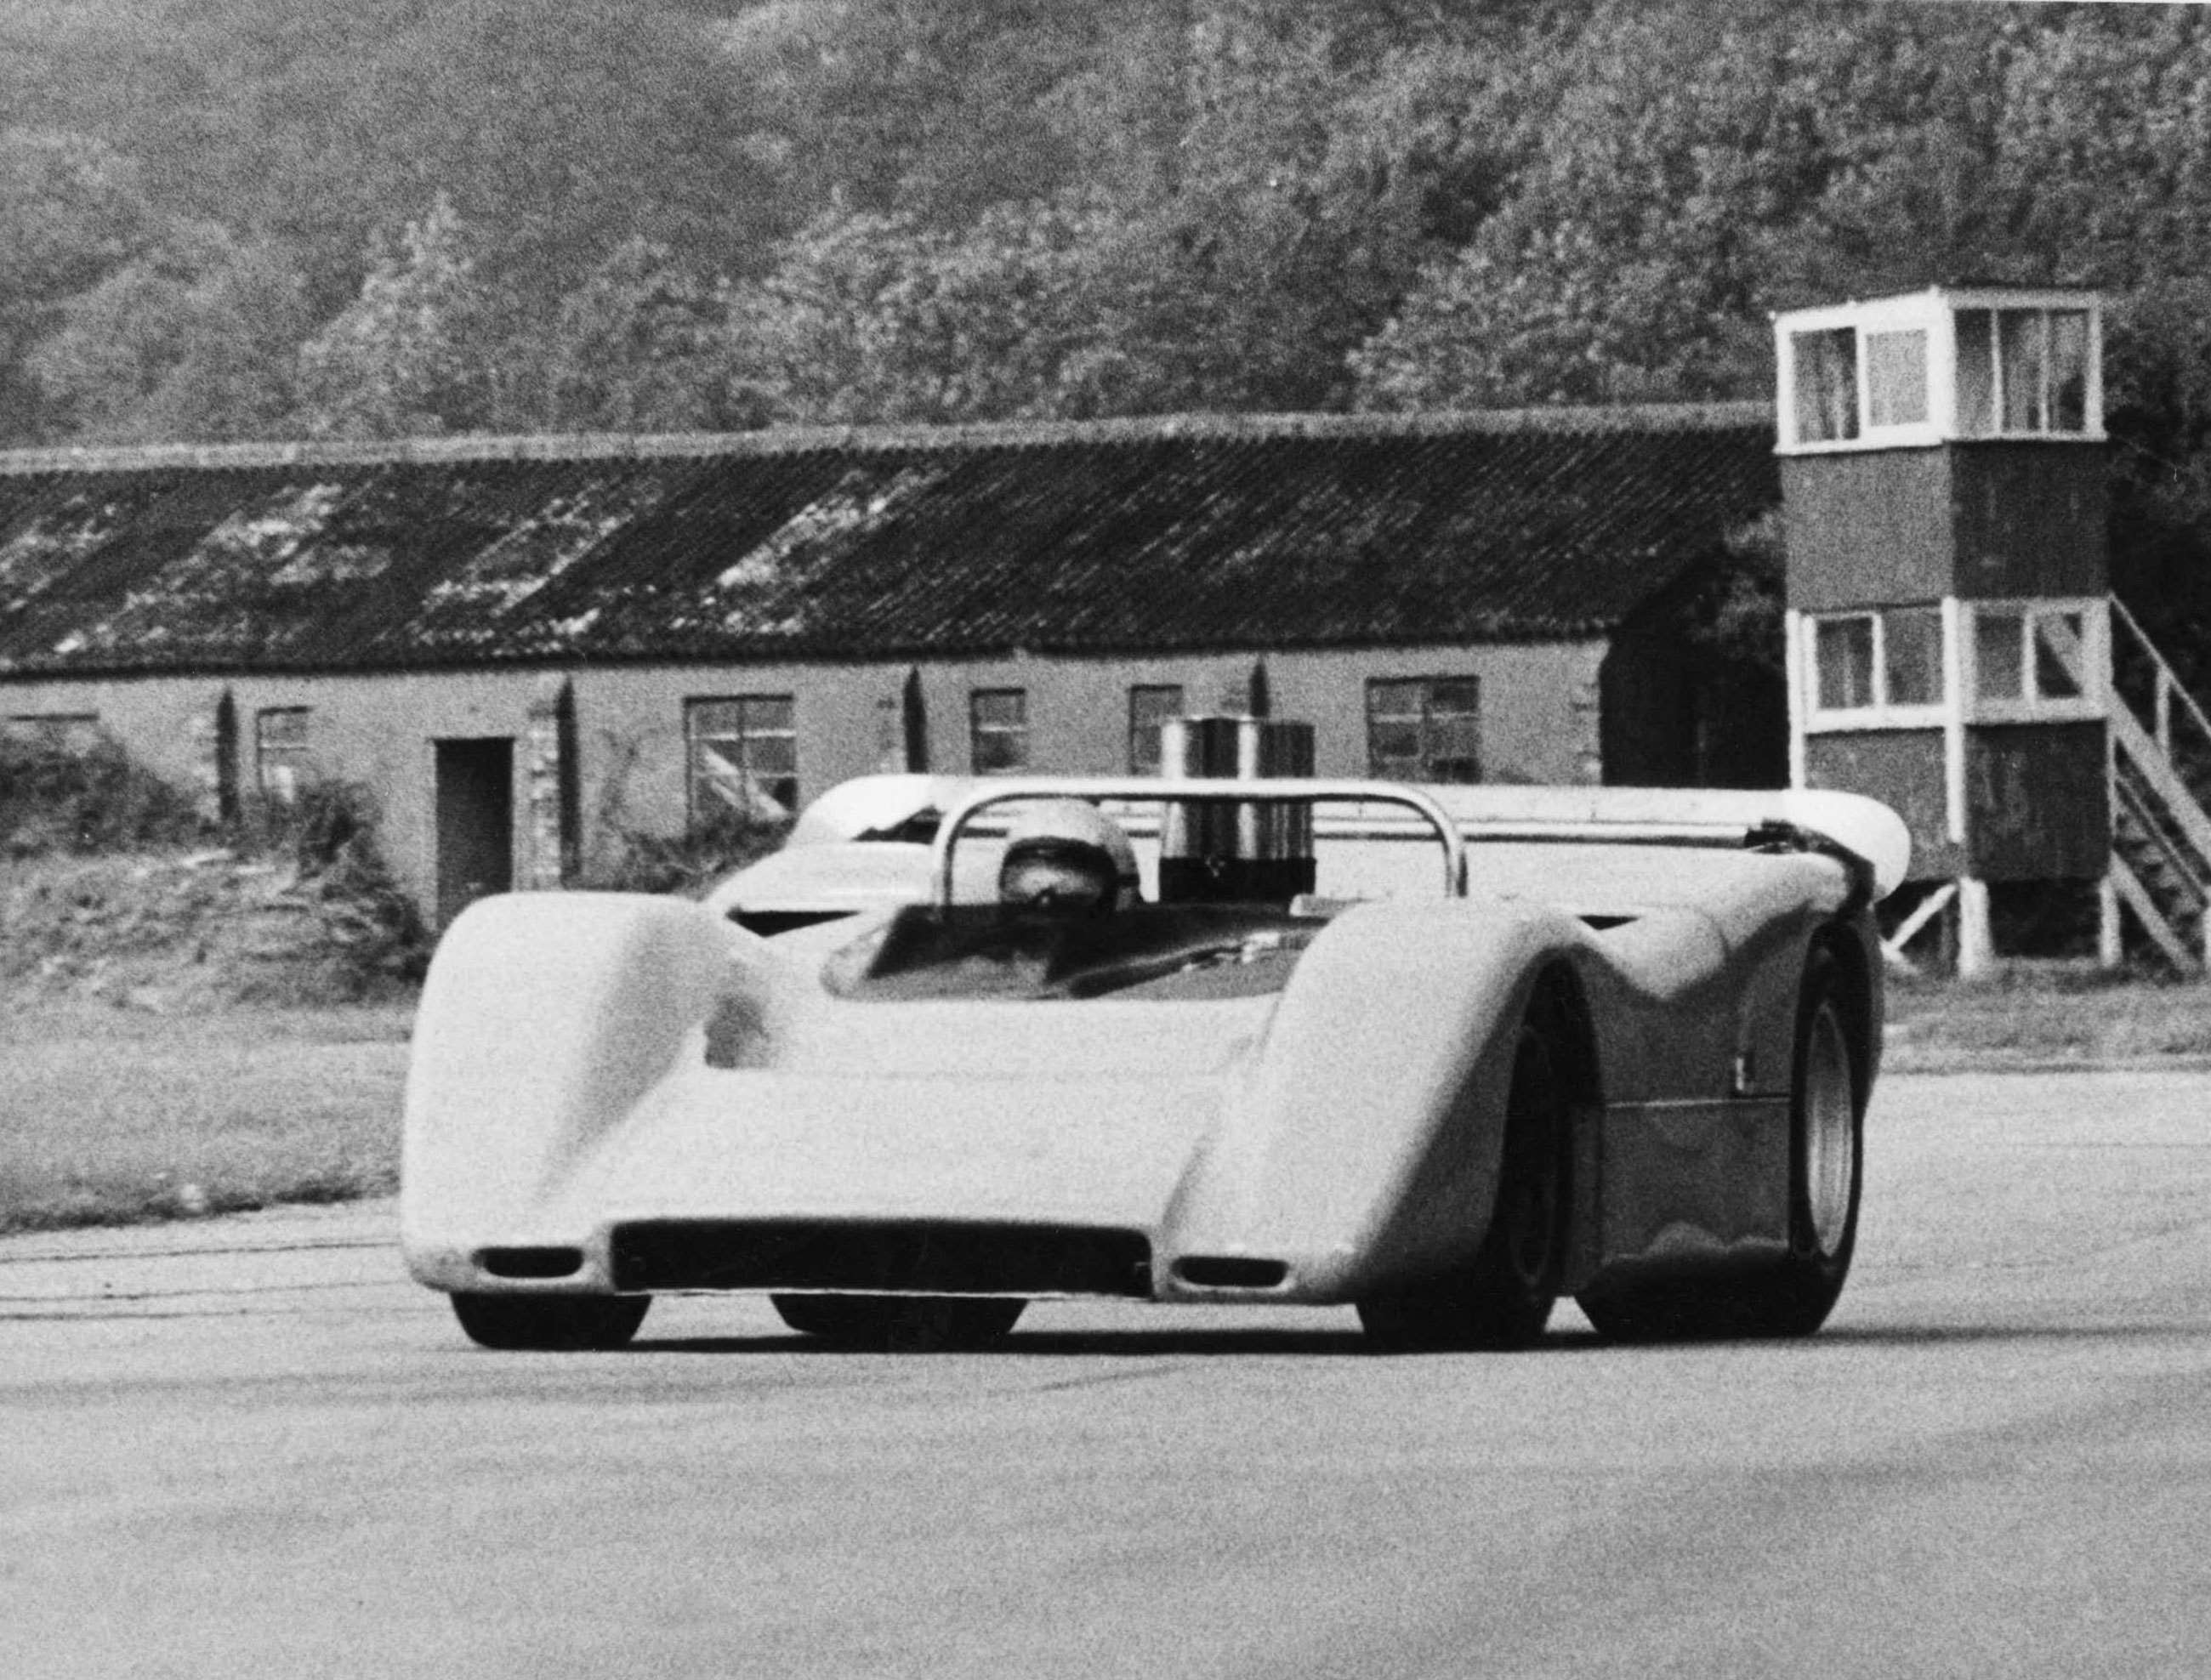 Bruce McLaren tearing past the Super Shell Building at Goodwood in a McLaren M8A.